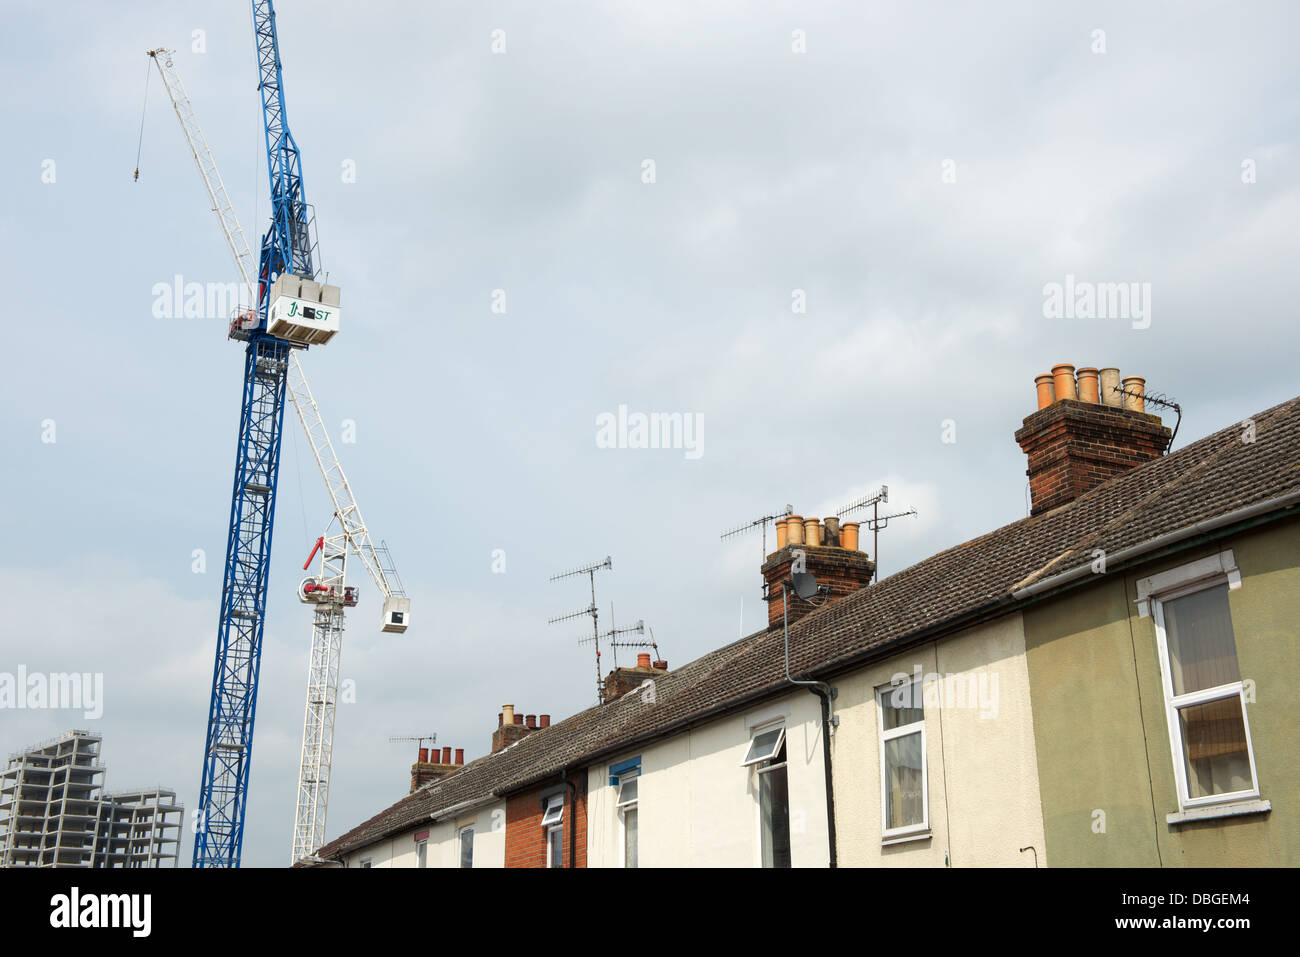 Construction of residential apartment block at the end of Bulstrode Road, Ipswich, Suffolk, UK. Stock Photo